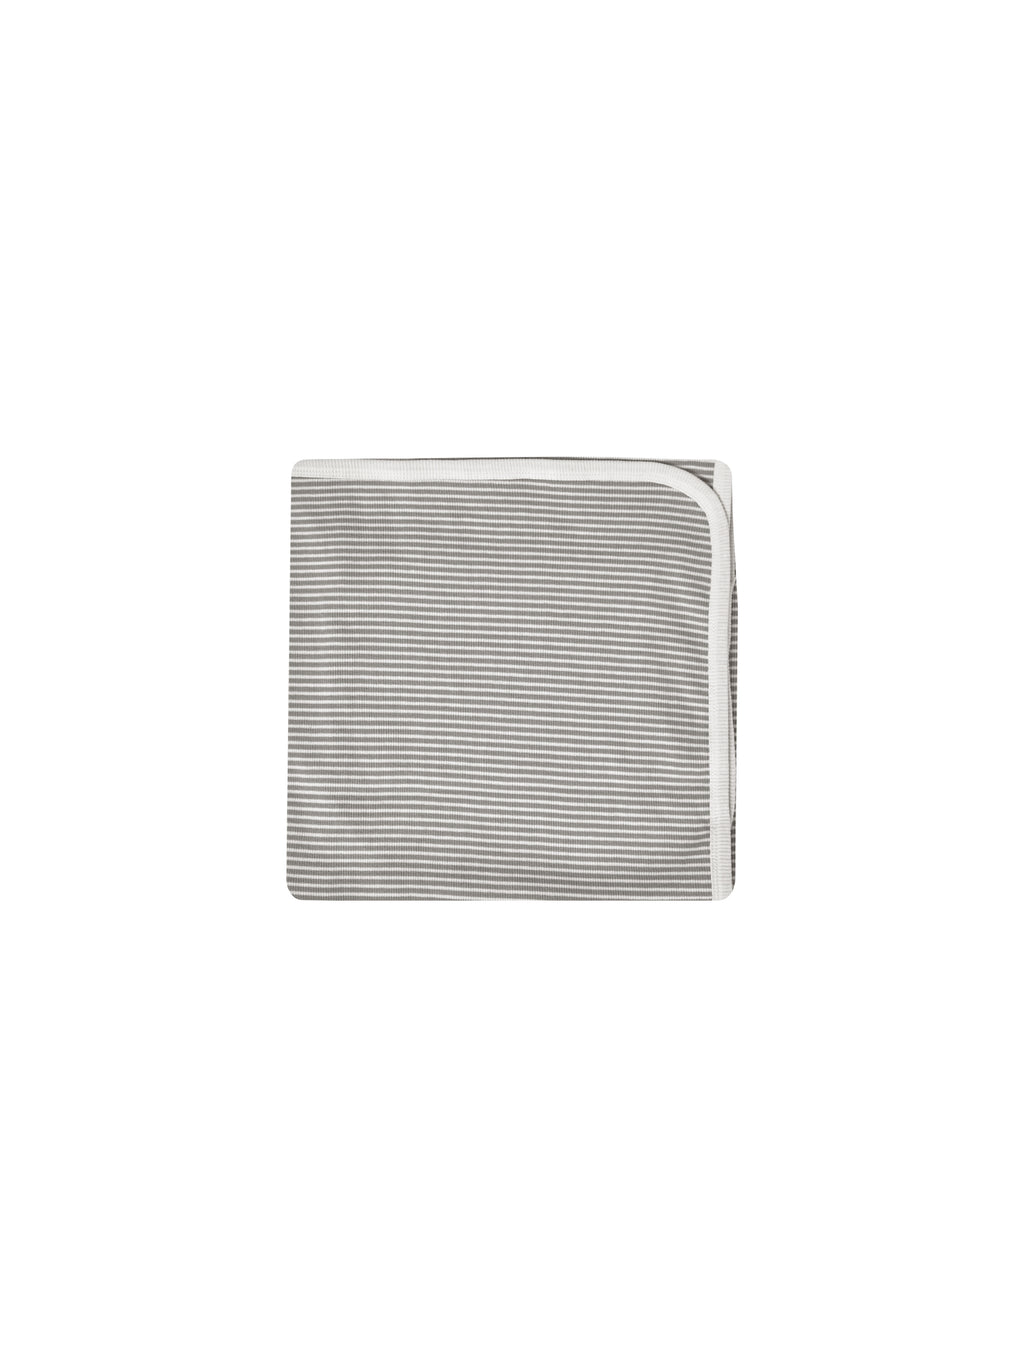 Quincy Mae Ribbed Baby Blanket - Lagoon Micro Stripe